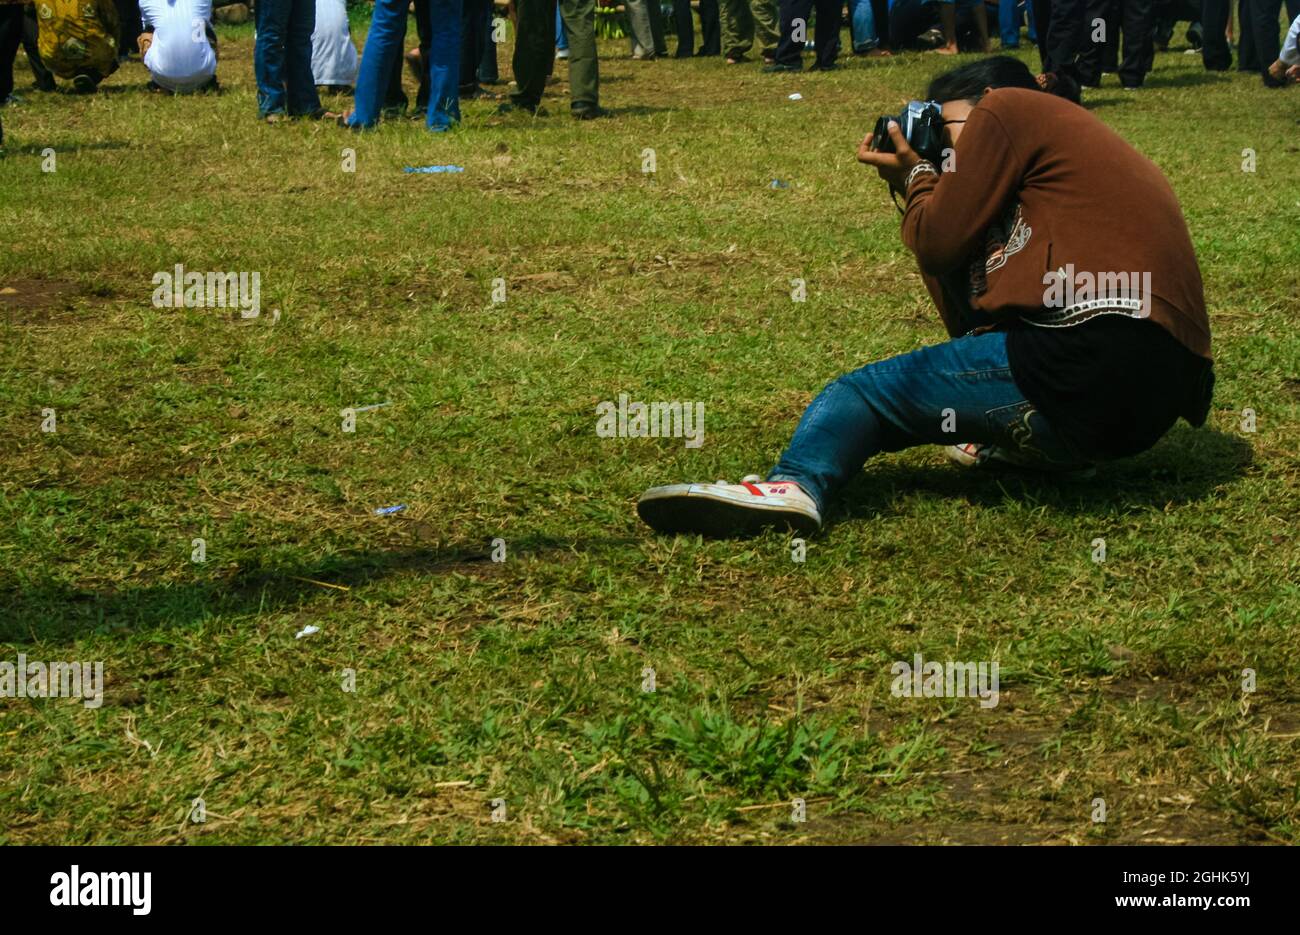 A person in a grassy field is photographing something until his body is lowered and his legs are bent. Stock Photo